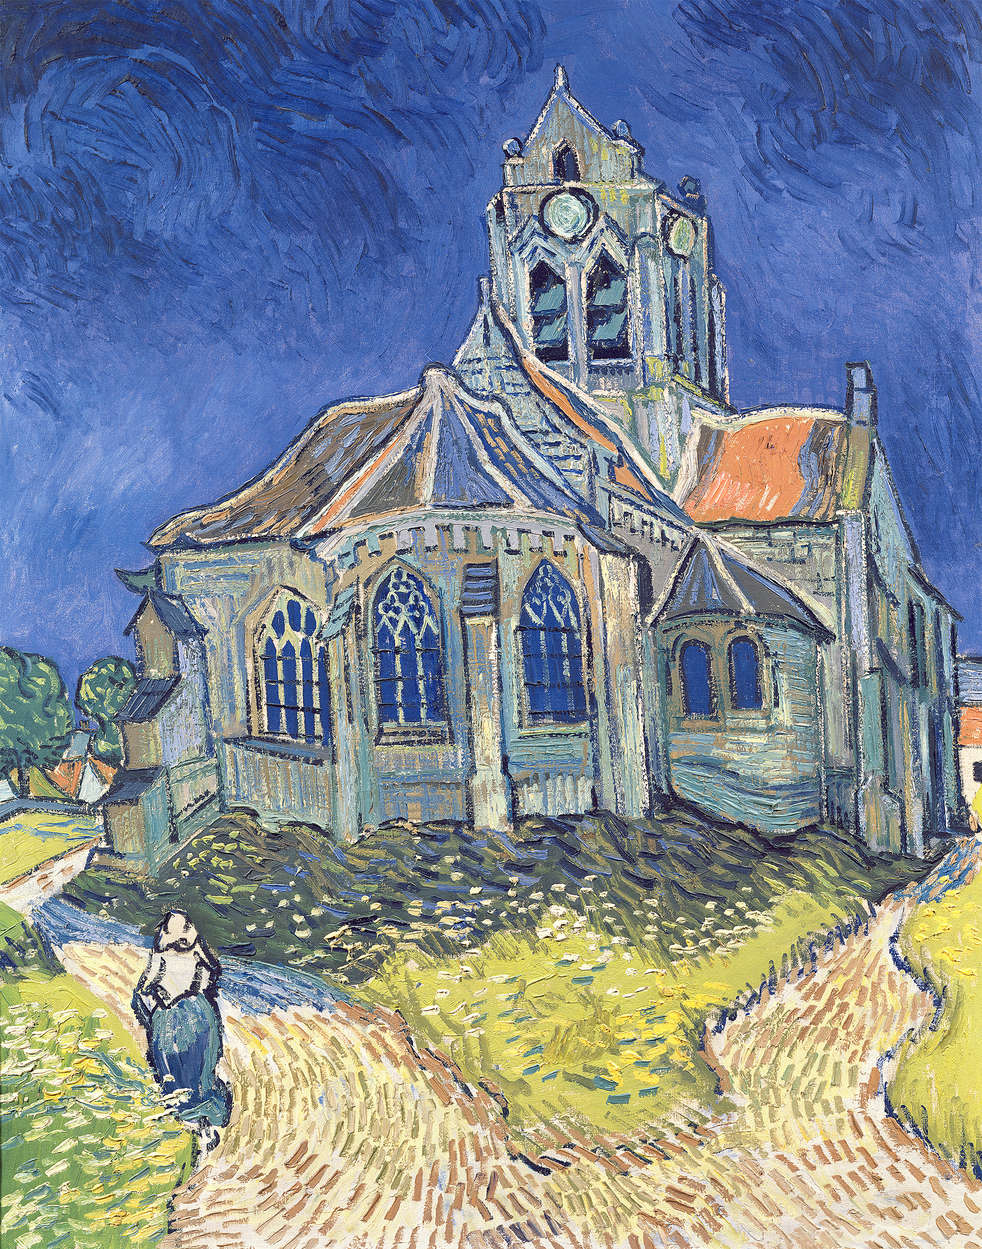             Photo wallpaper "The church in Auvers" by Vincent van Gogh
        